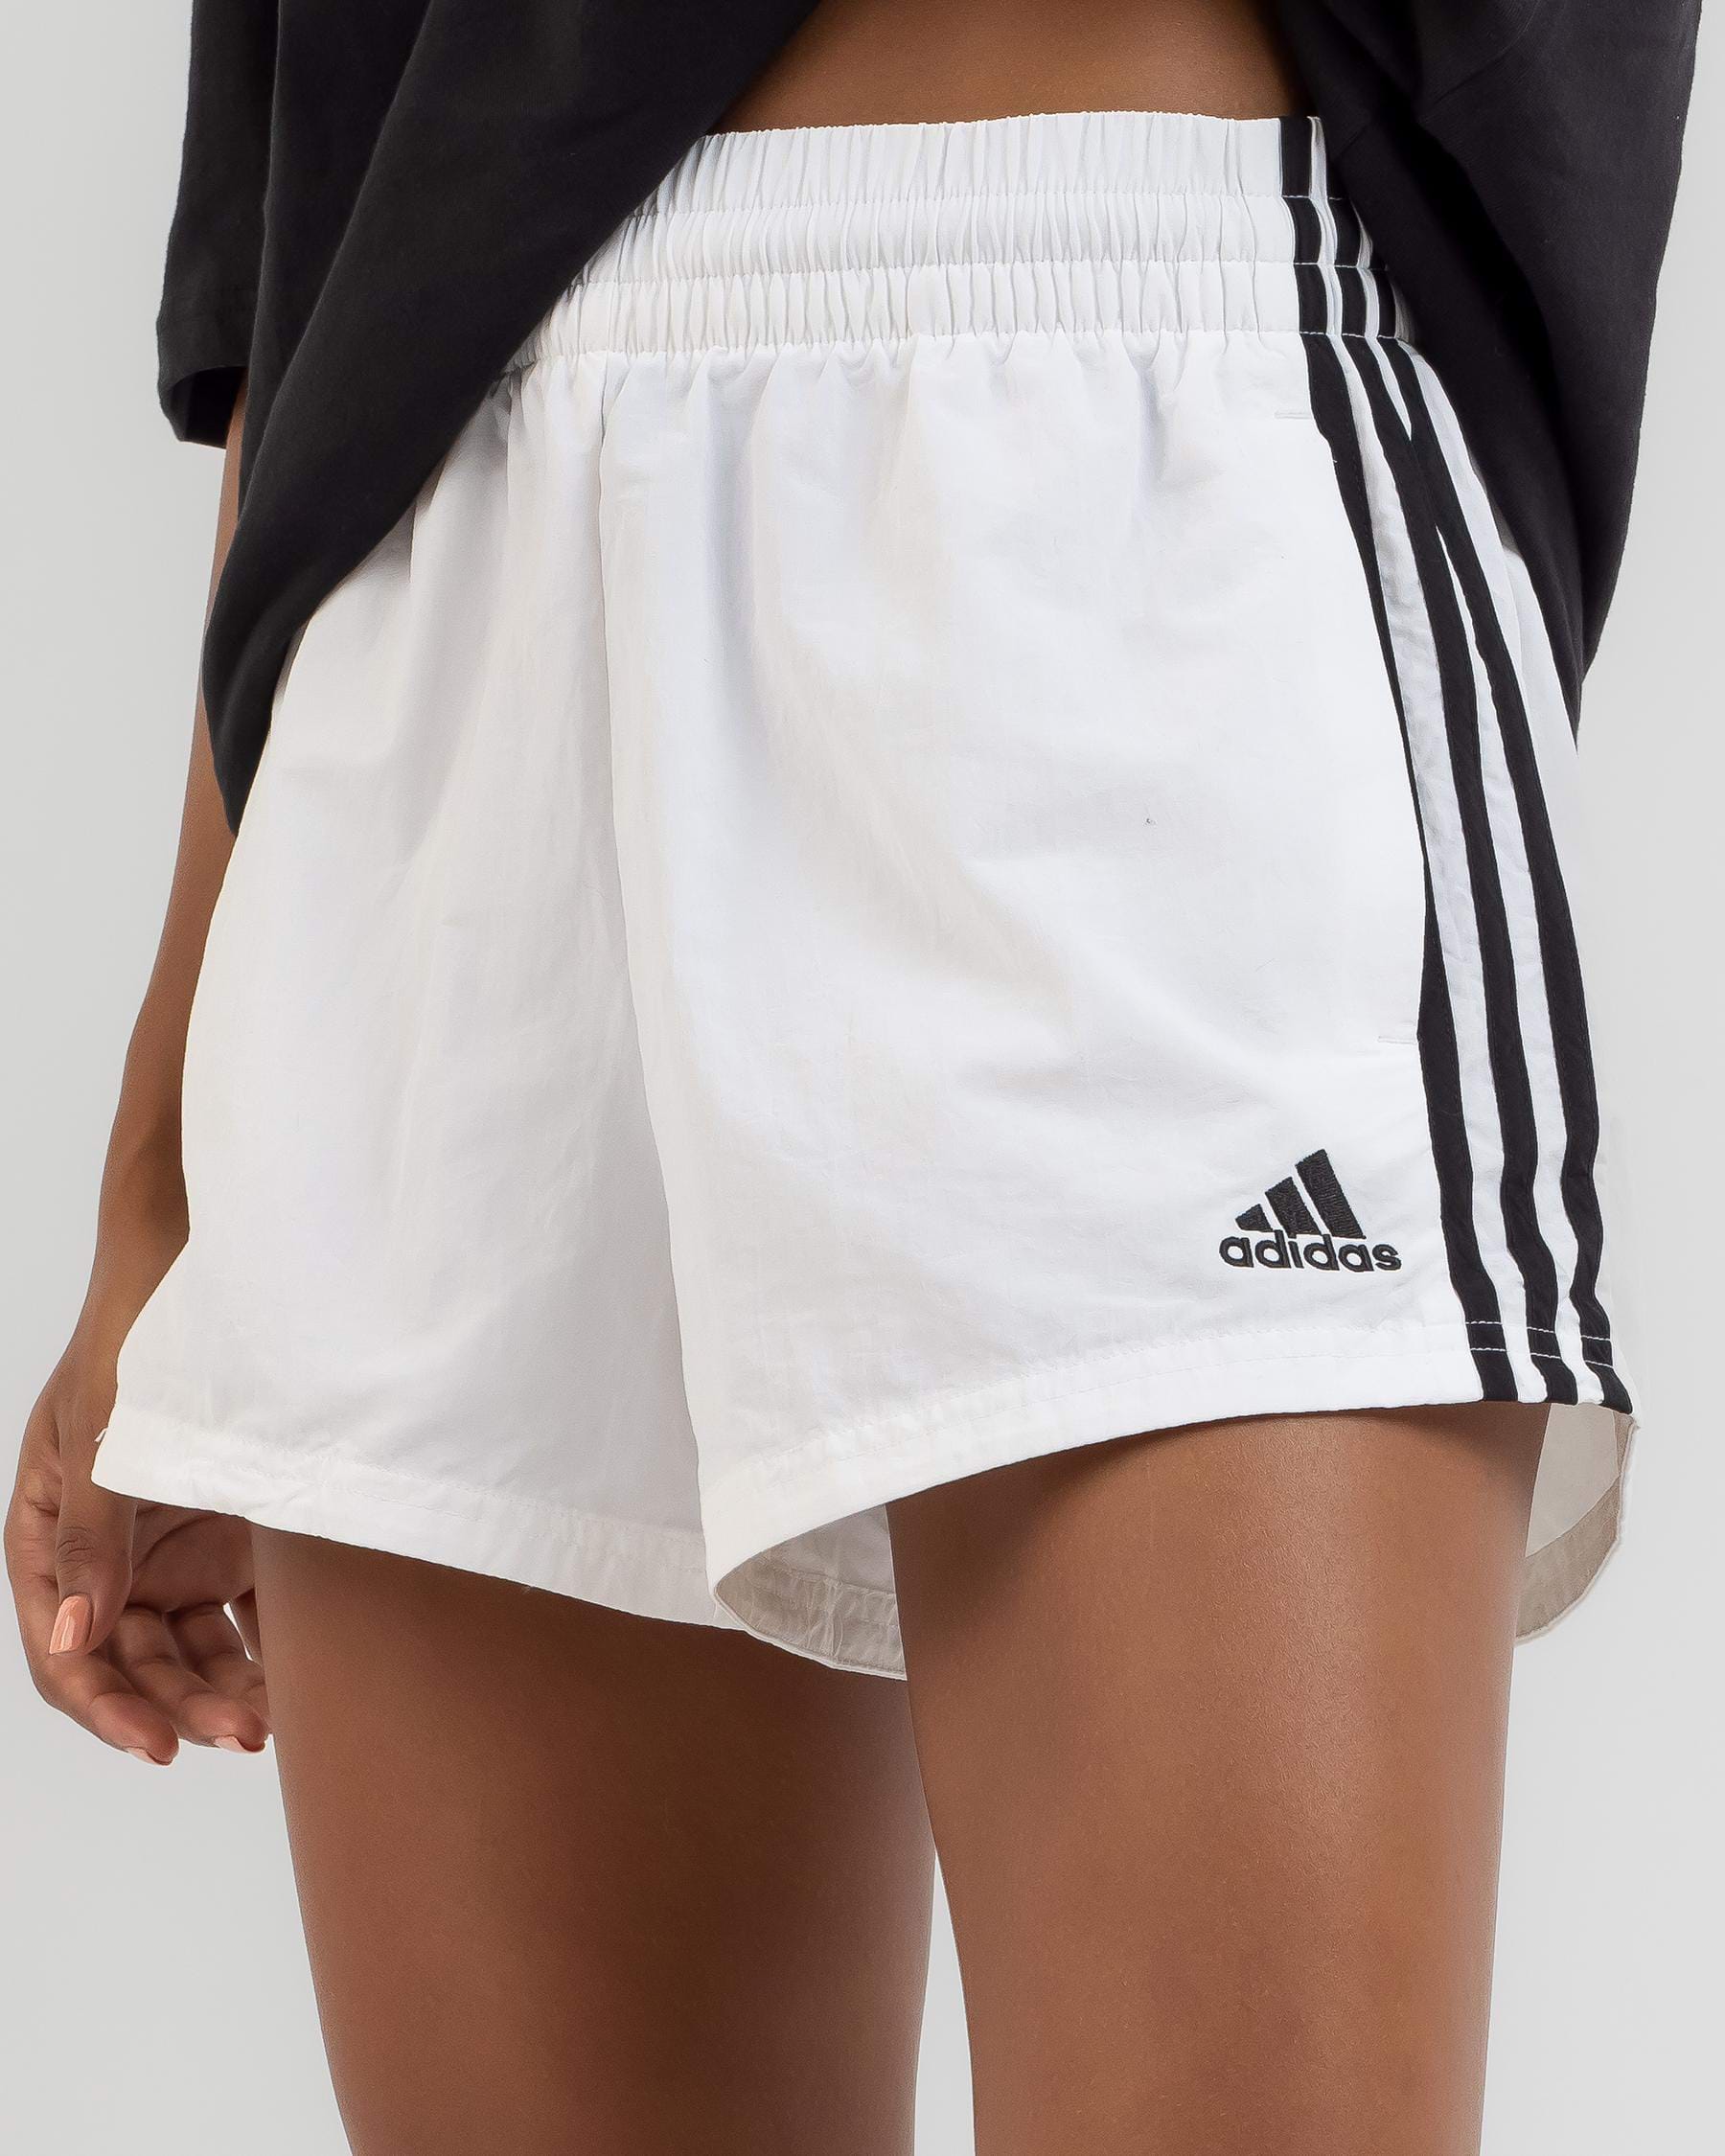 Beach FREE* Easy - White/black Stripe - Shipping Shorts Returns Essentials City & United Woven 3 In Adidas States